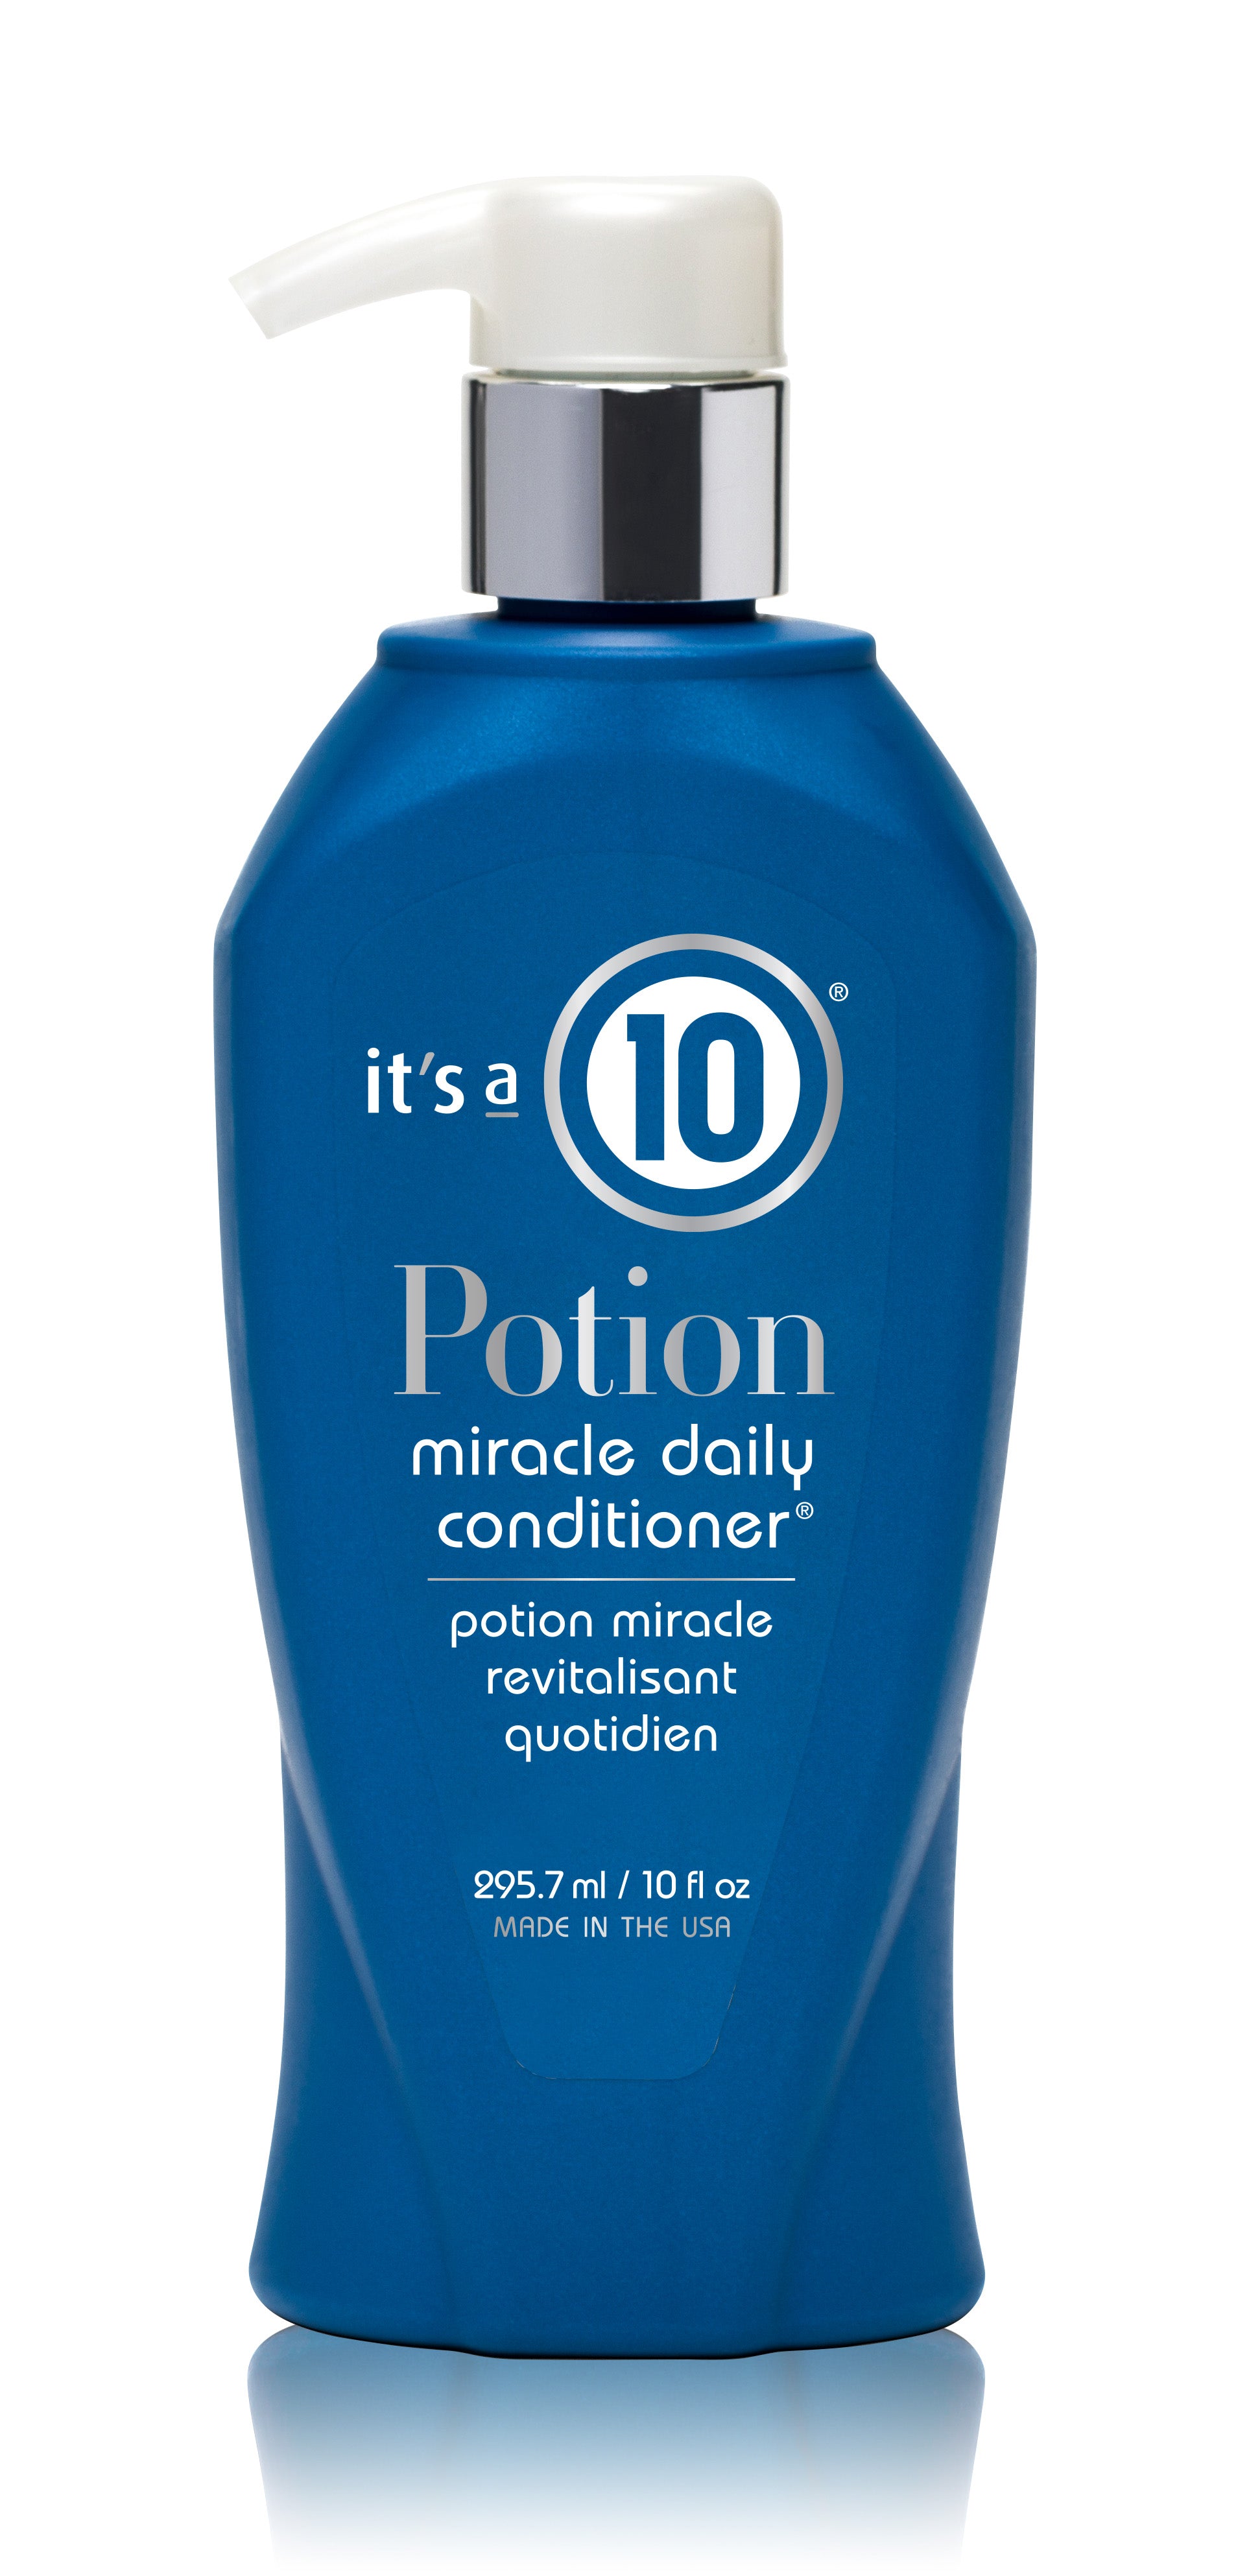 It's a 10 Potion Miracle Daily Conditioner